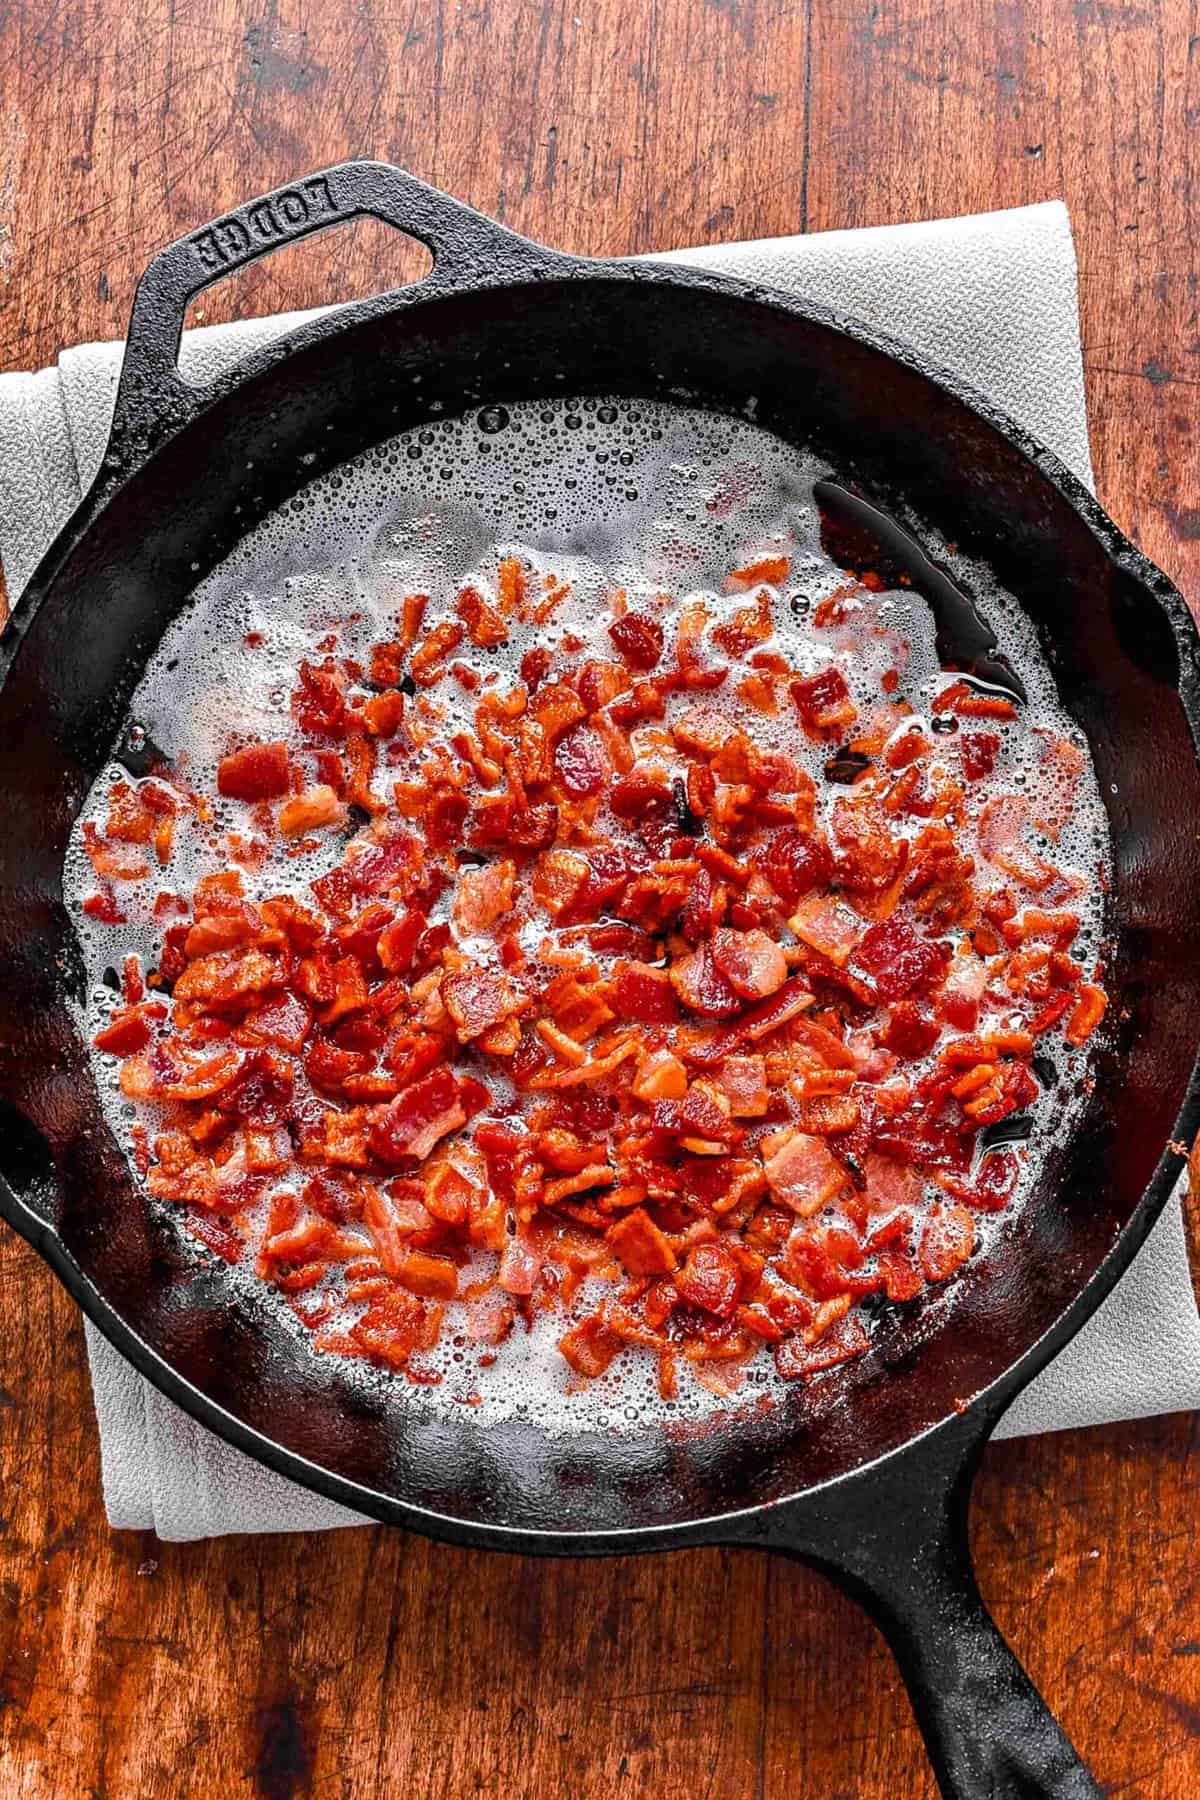 Cooking bacon in a skillet.